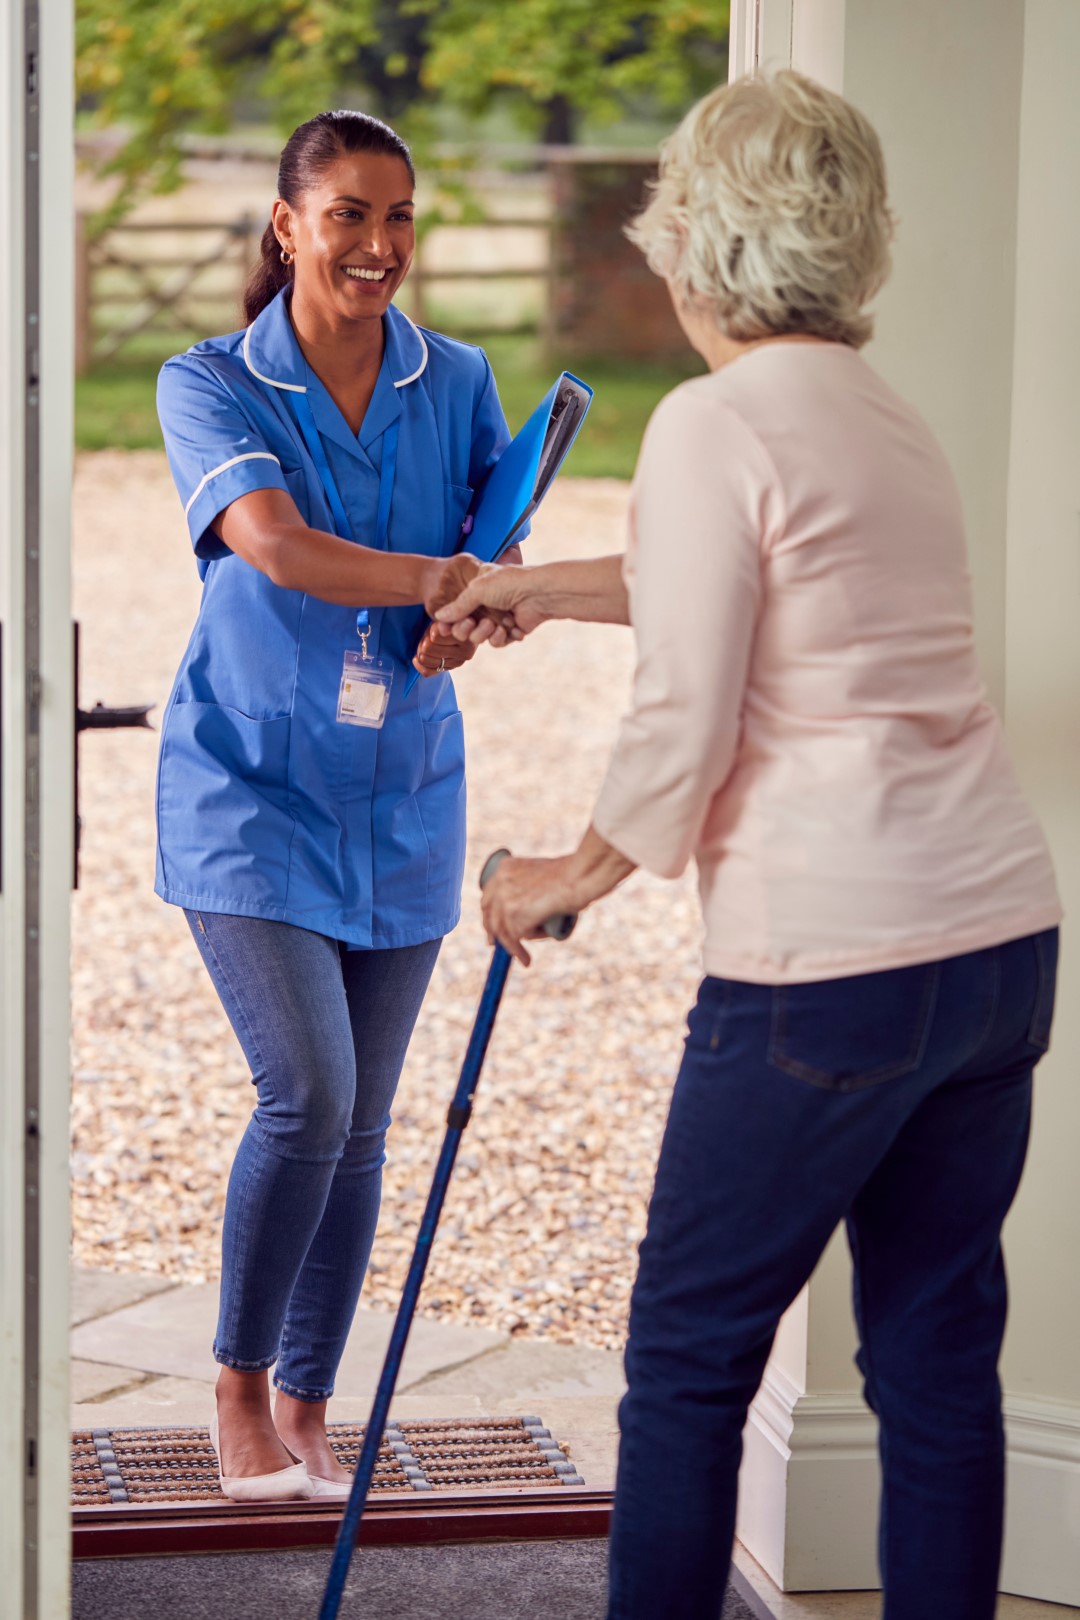 Senior Woman At Home Using Walking Stick Greeting Female Nurse Or Care Worker In Uniform At Door